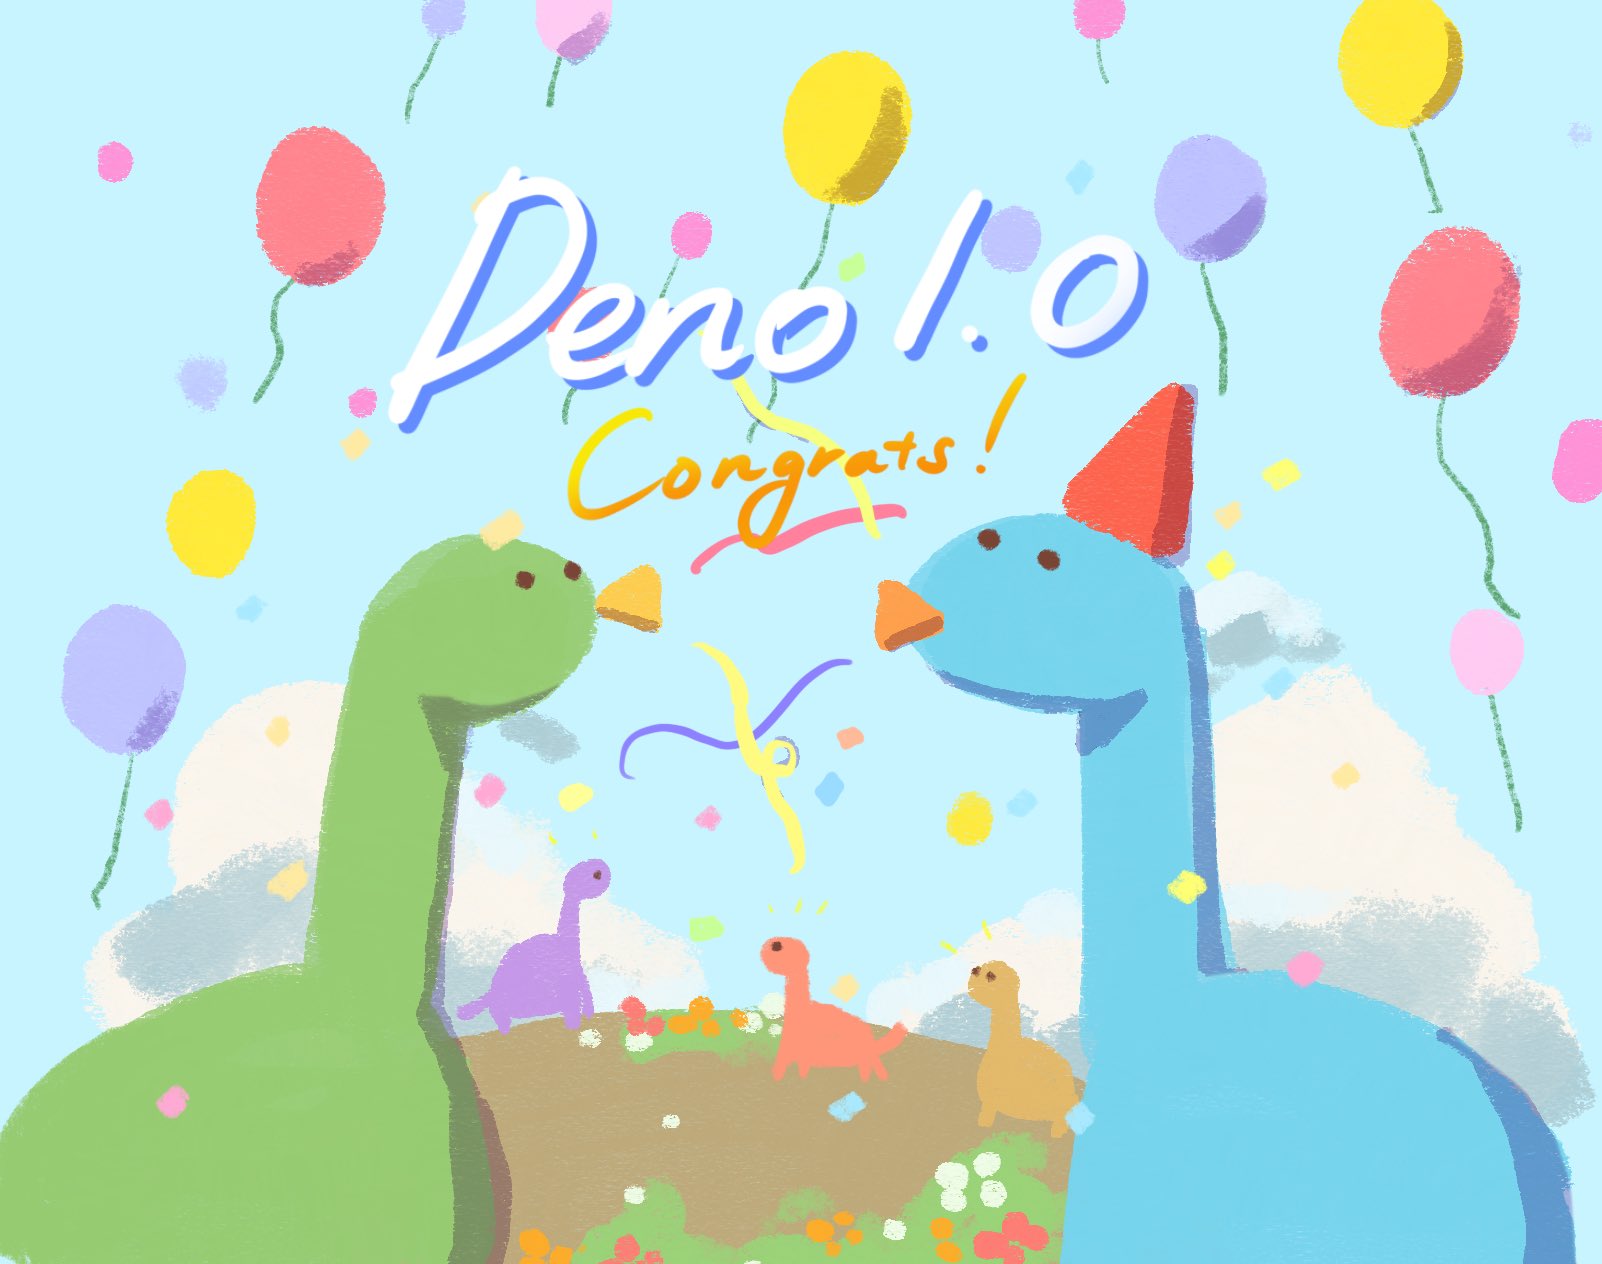 a drawing with two large deno mascots in the front and smaller ones behind, standing on brown ground in front of a blue sky. above them text reads: deno 1.0 congrats!